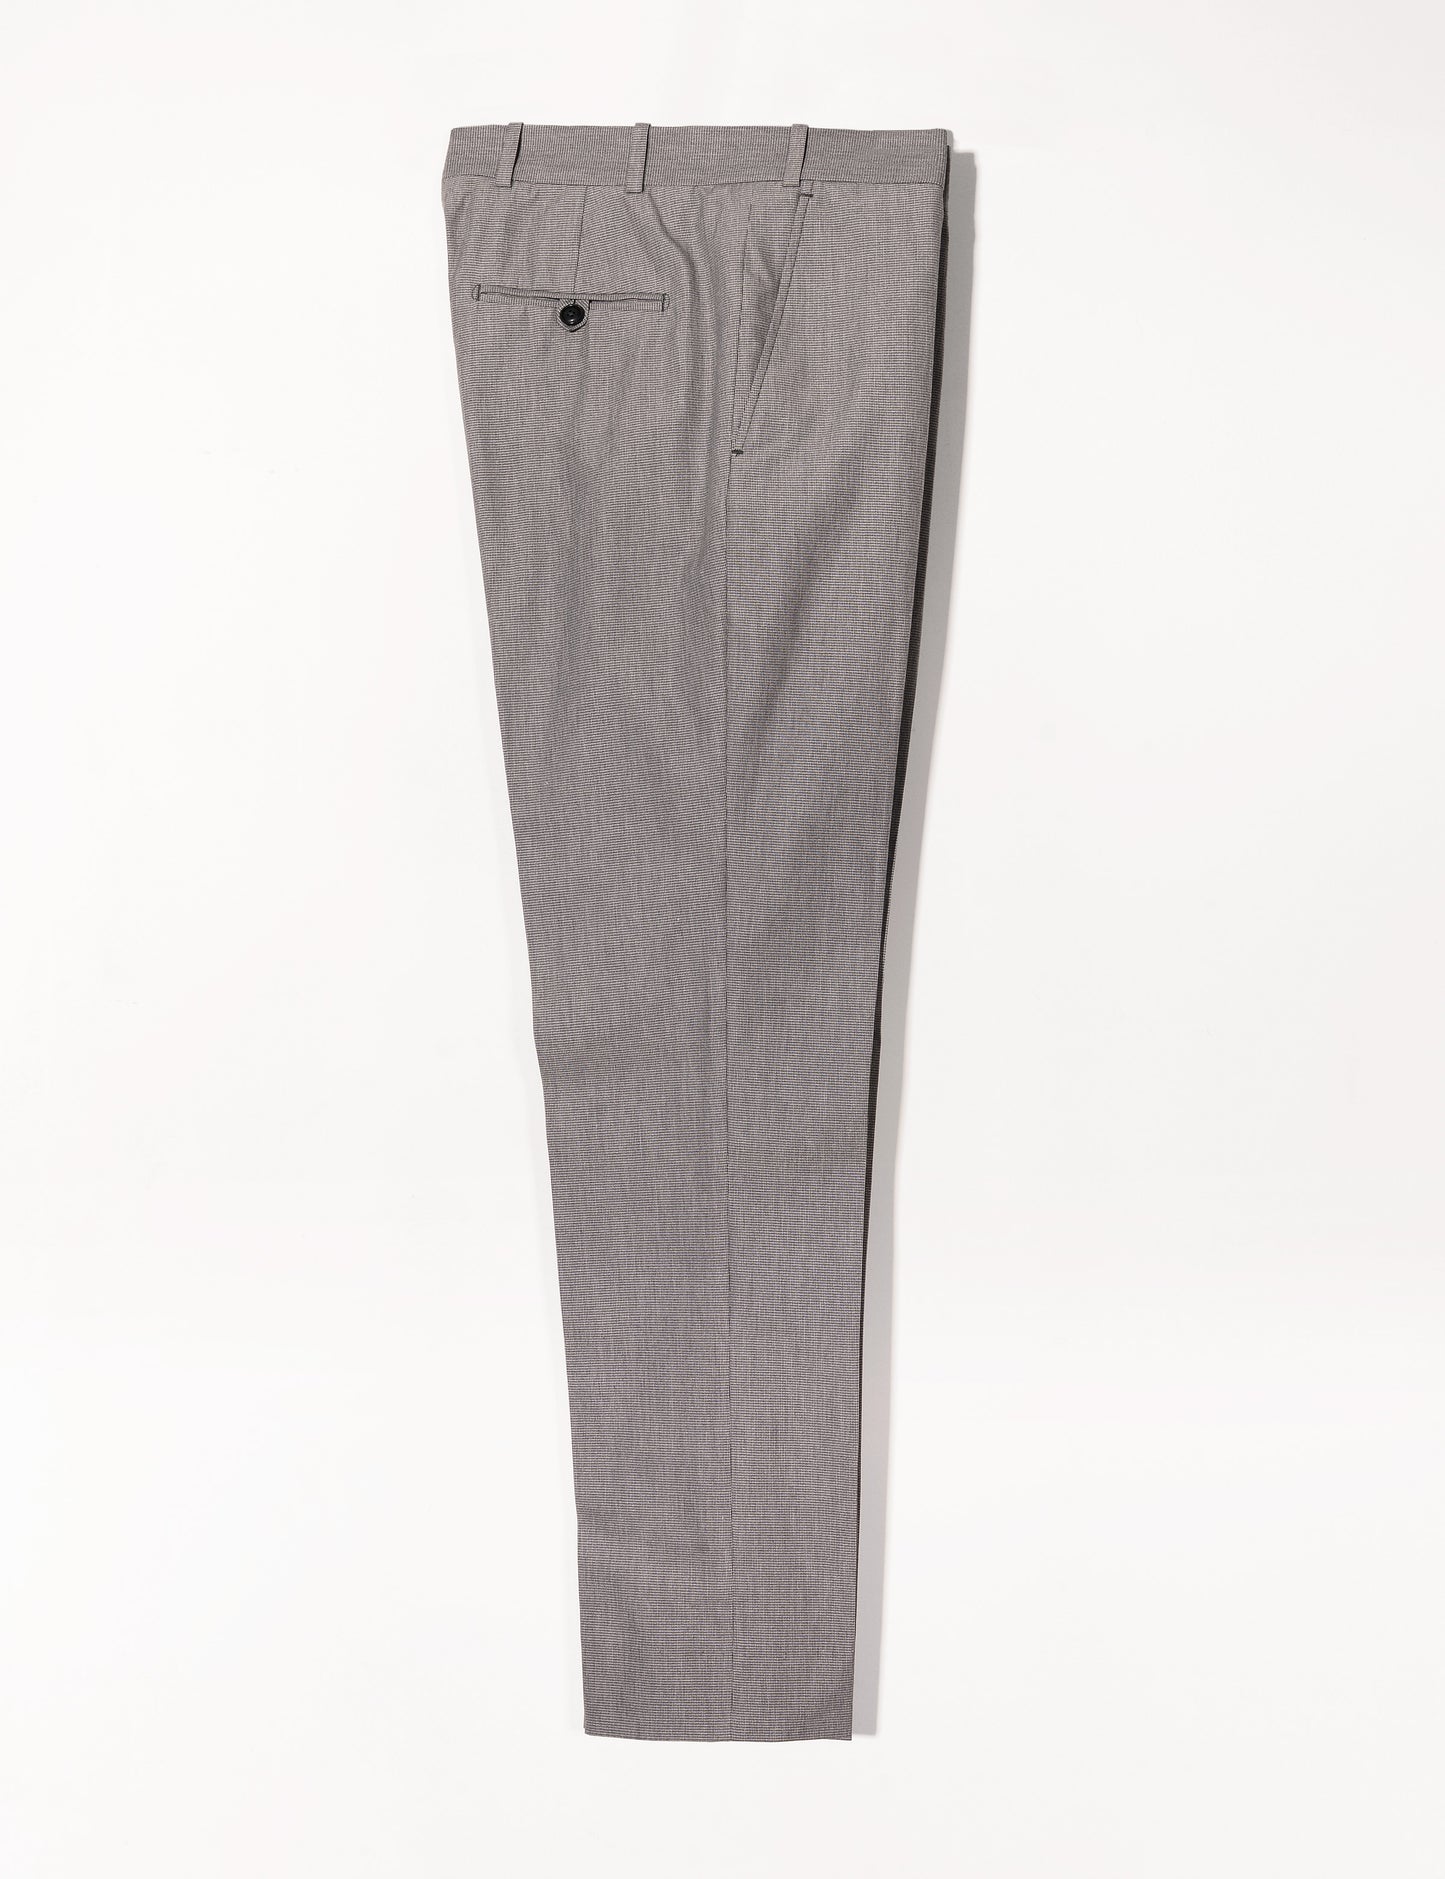 BKT50 Tailored Trousers in Cotton Micro Weave - Graphite